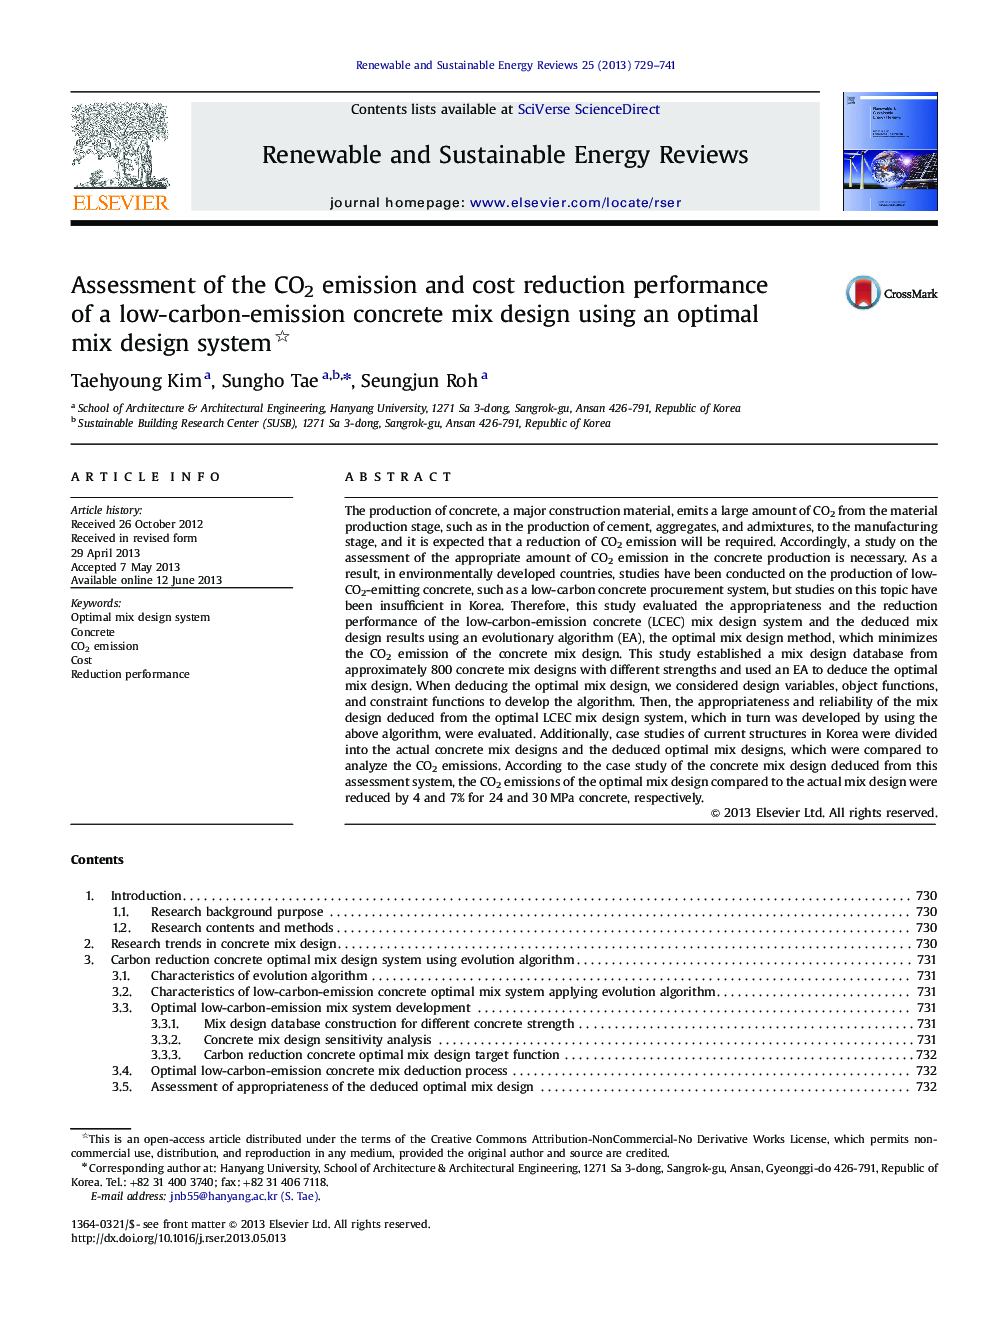 Assessment of the CO2 emission and cost reduction performance of a low-carbon-emission concrete mix design using an optimal mix design system